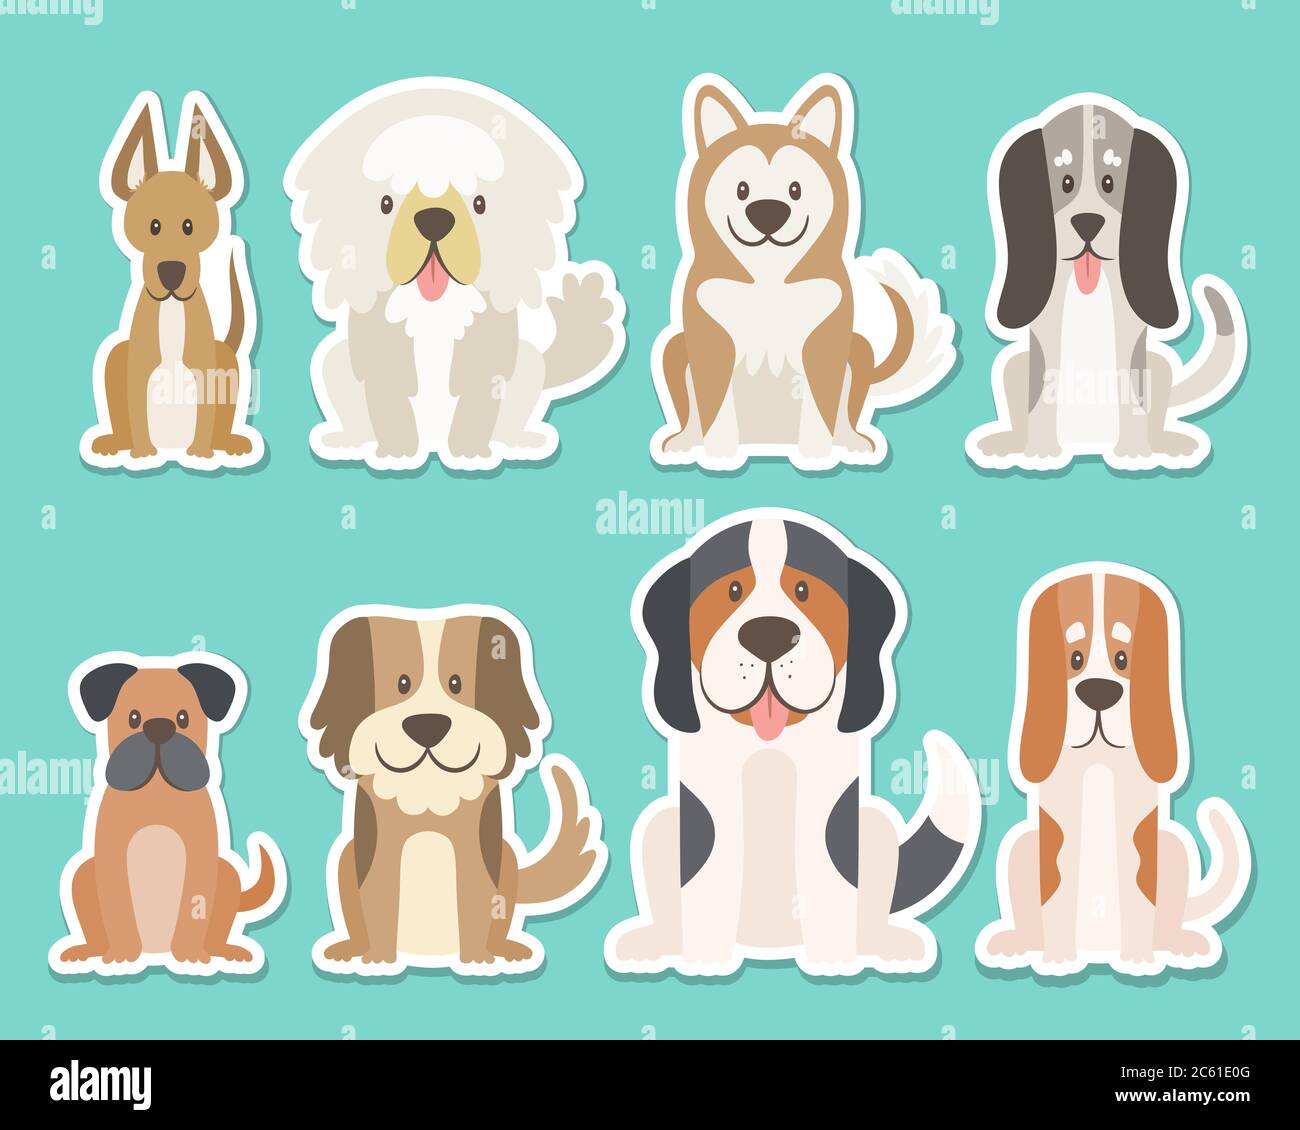 Sticker collection of different kinds of dogs. Sat dogs in front view position. Saint Bernard, boxer, sheepdog, husky. Vector illustration. Stock Vector